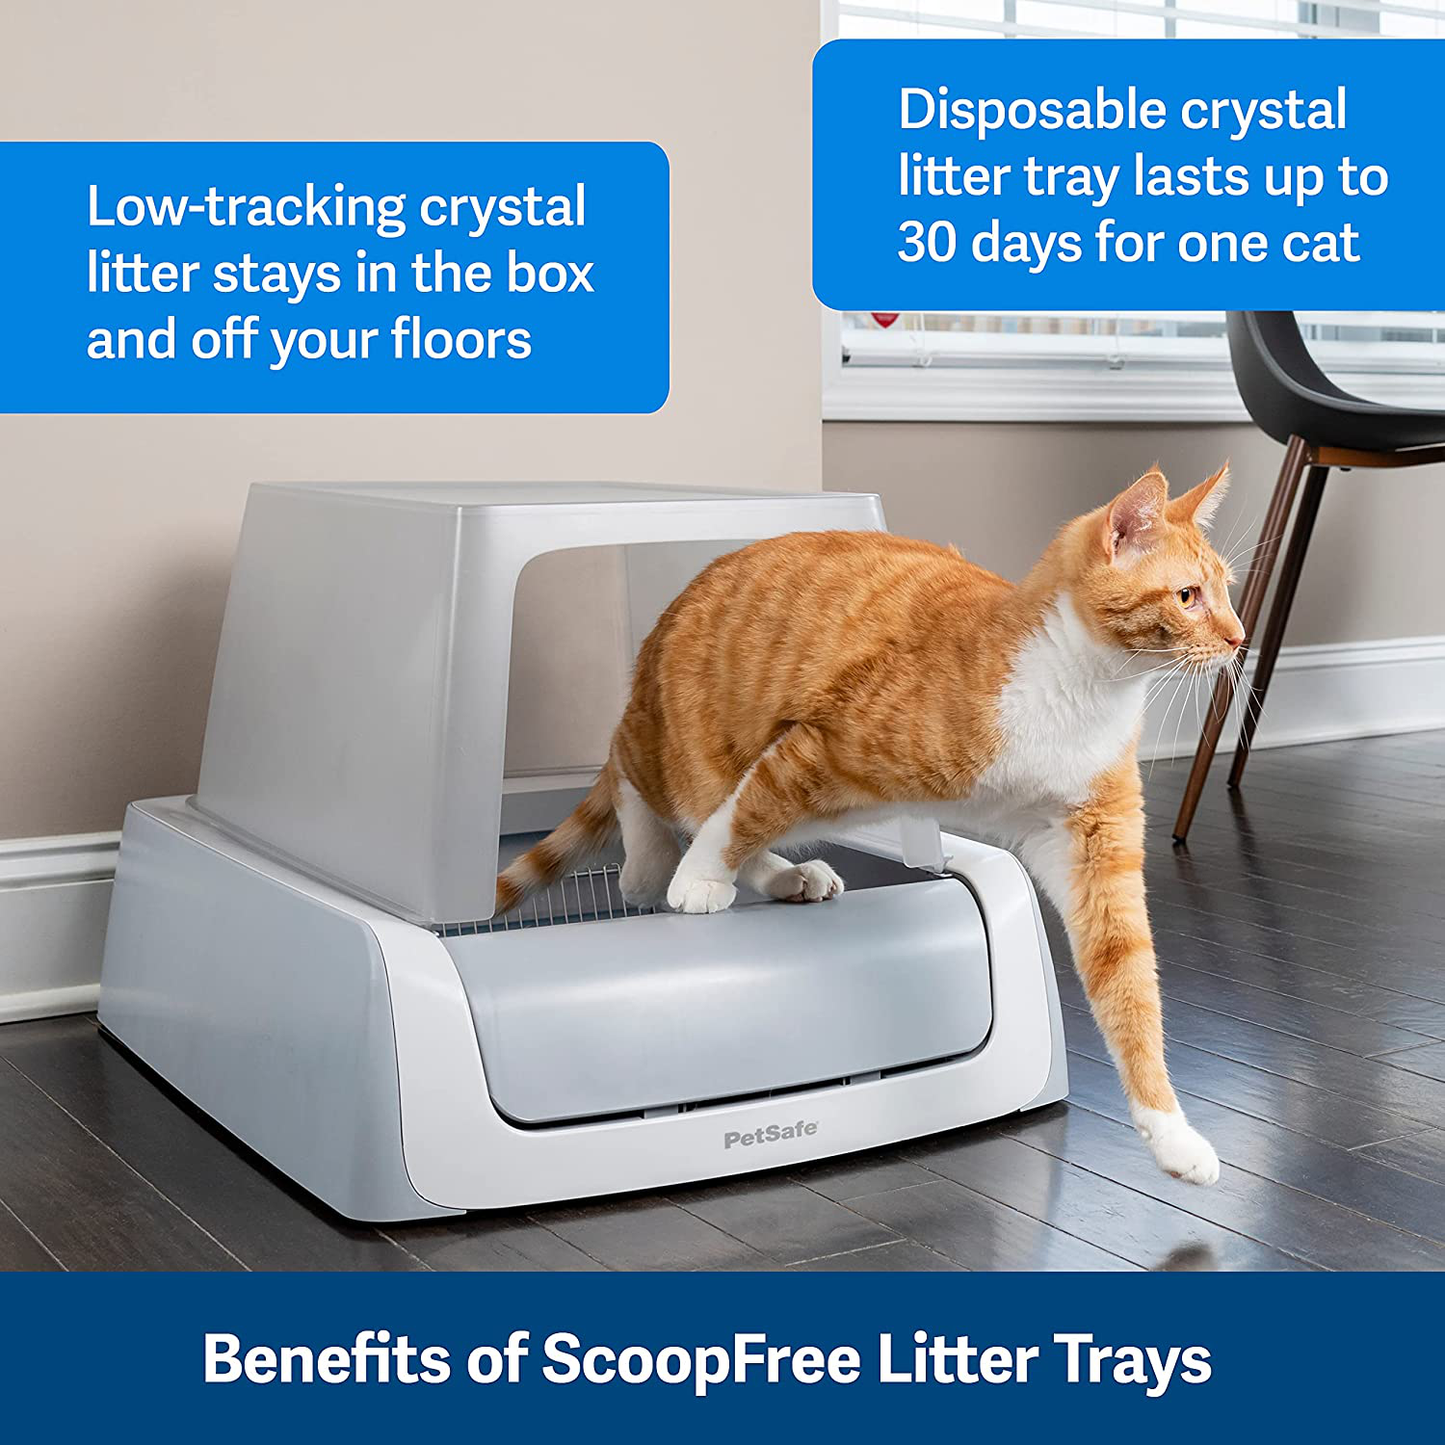 Petsafe Scoopfree Cat Litter Crystal Tray Refills for Scoopfree Self-Cleaning Cat Litter Boxes - 6-Pack - Non-Clumping, Less Mess, Odor Control - Available in Original Blue, Lavender, or Sensitive